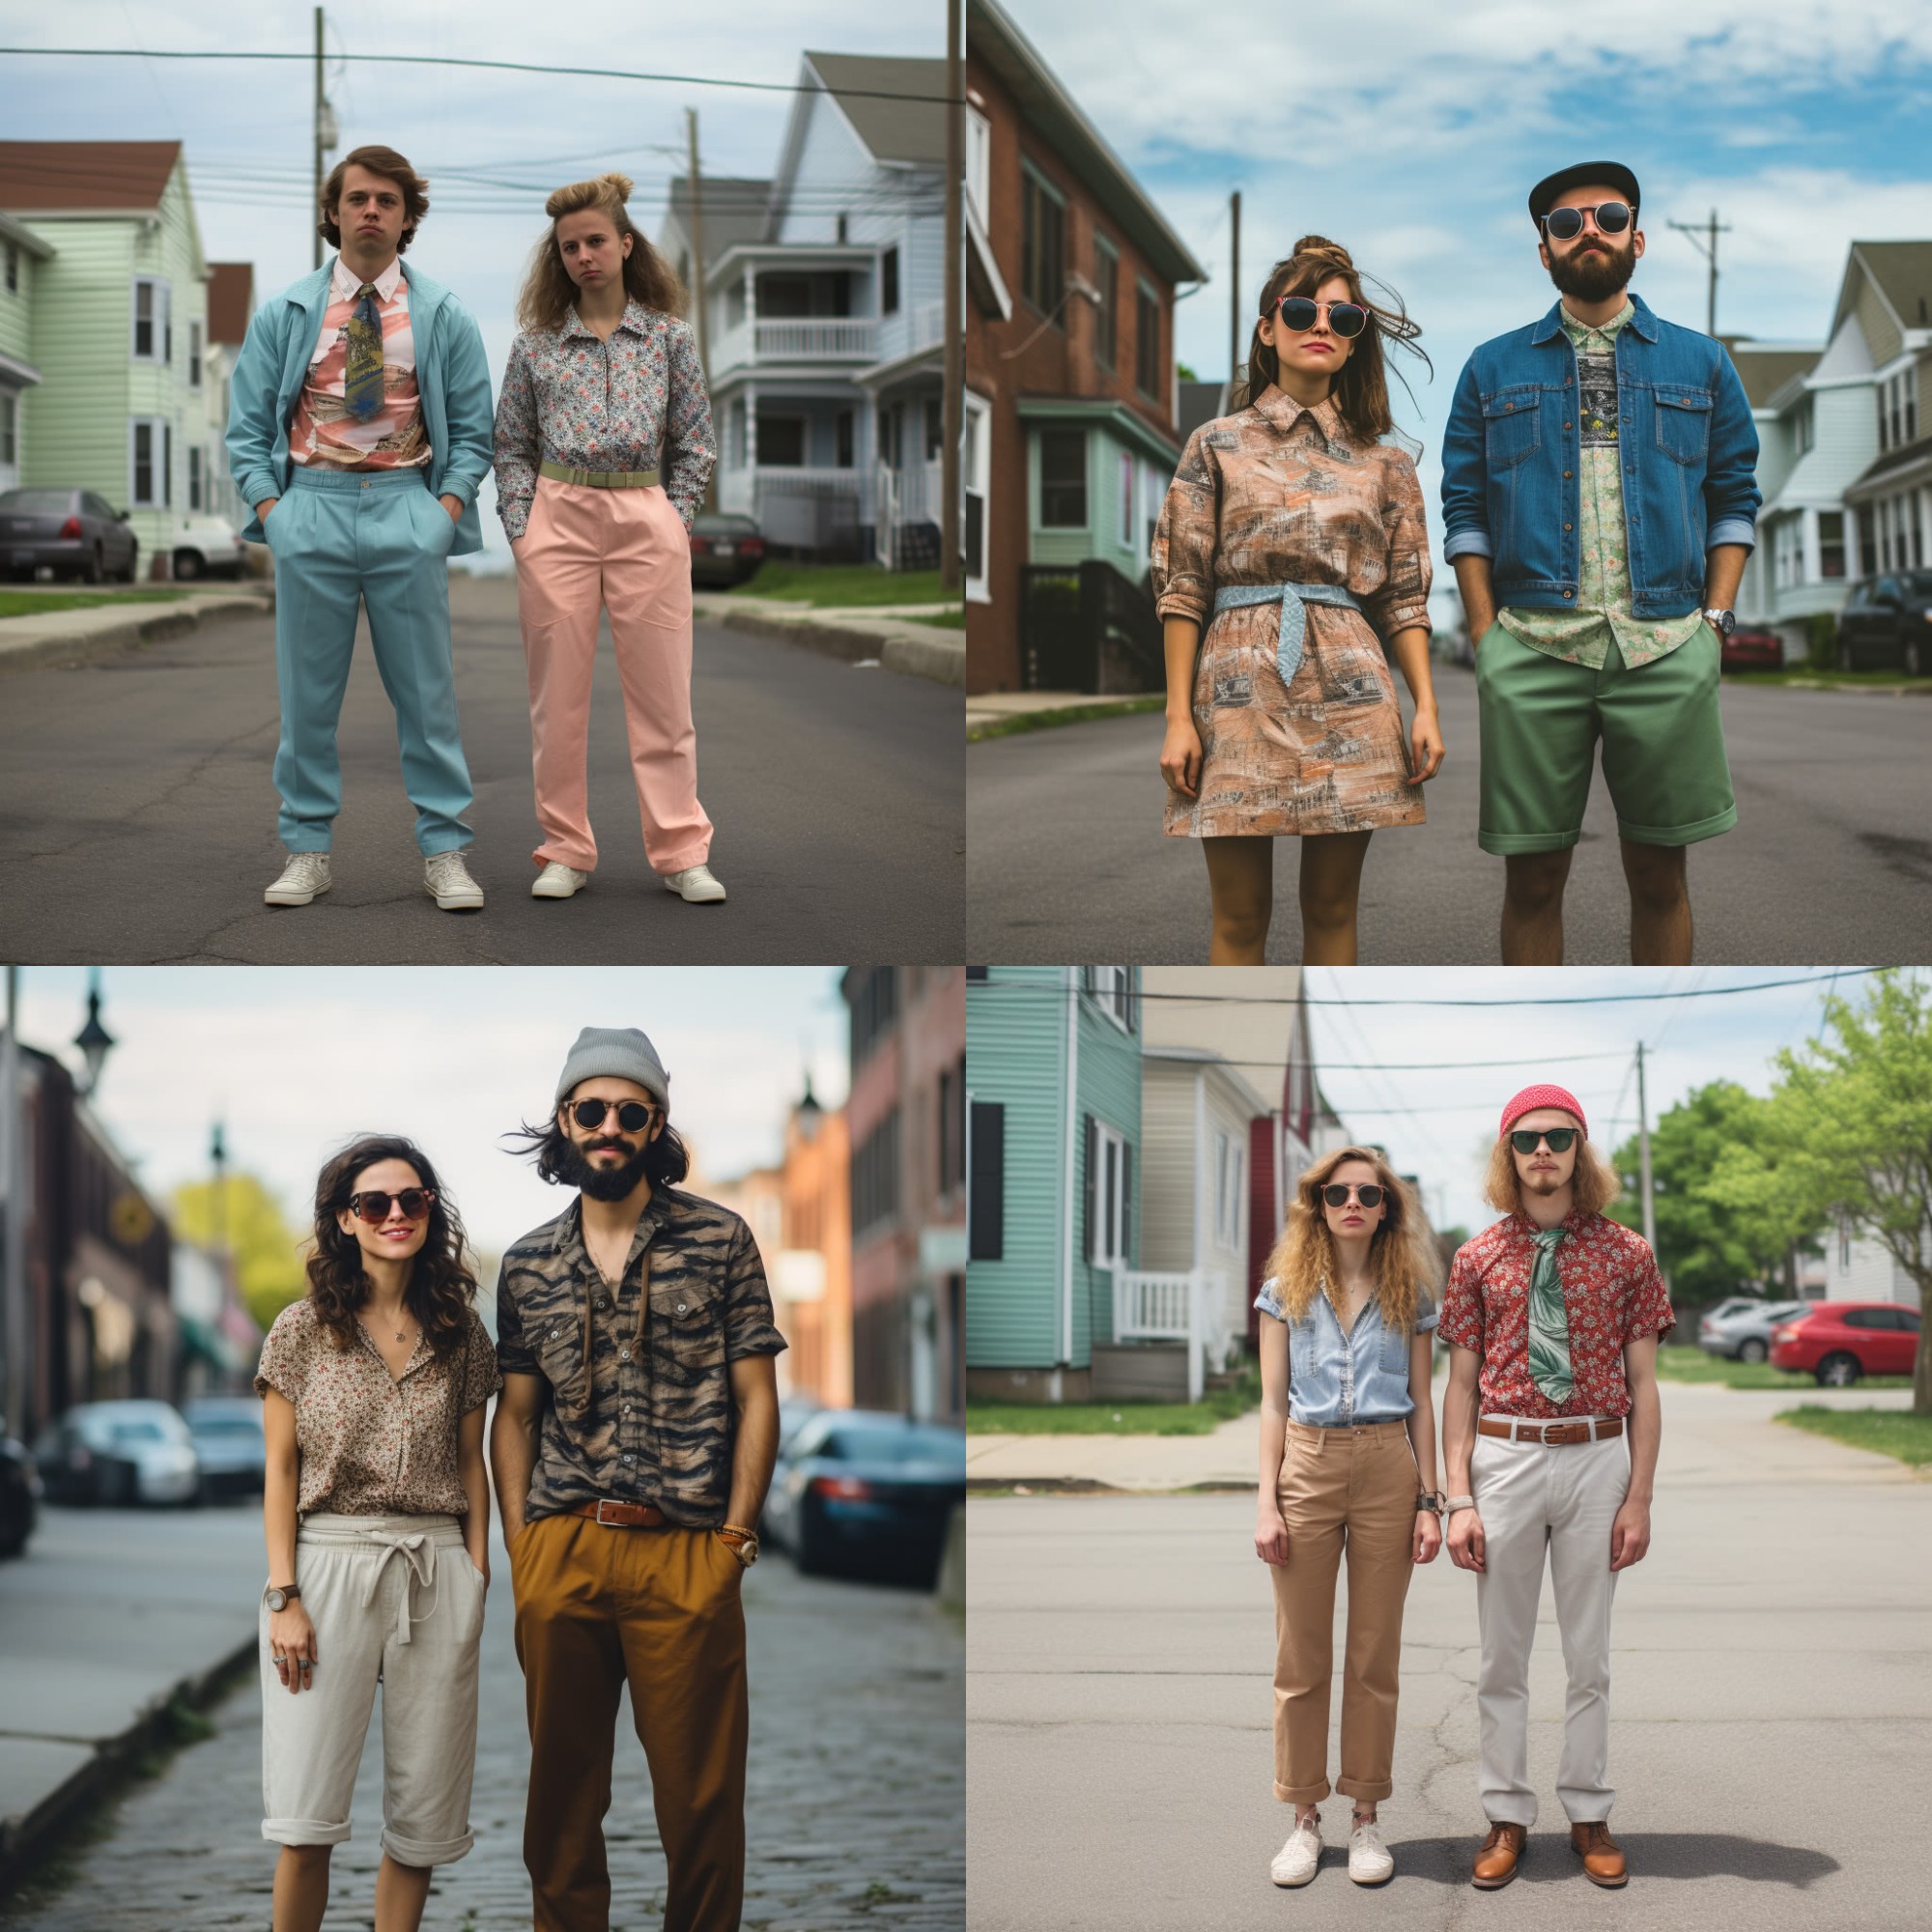 AI curated images of the average fashion style of individuals in Rhode Island